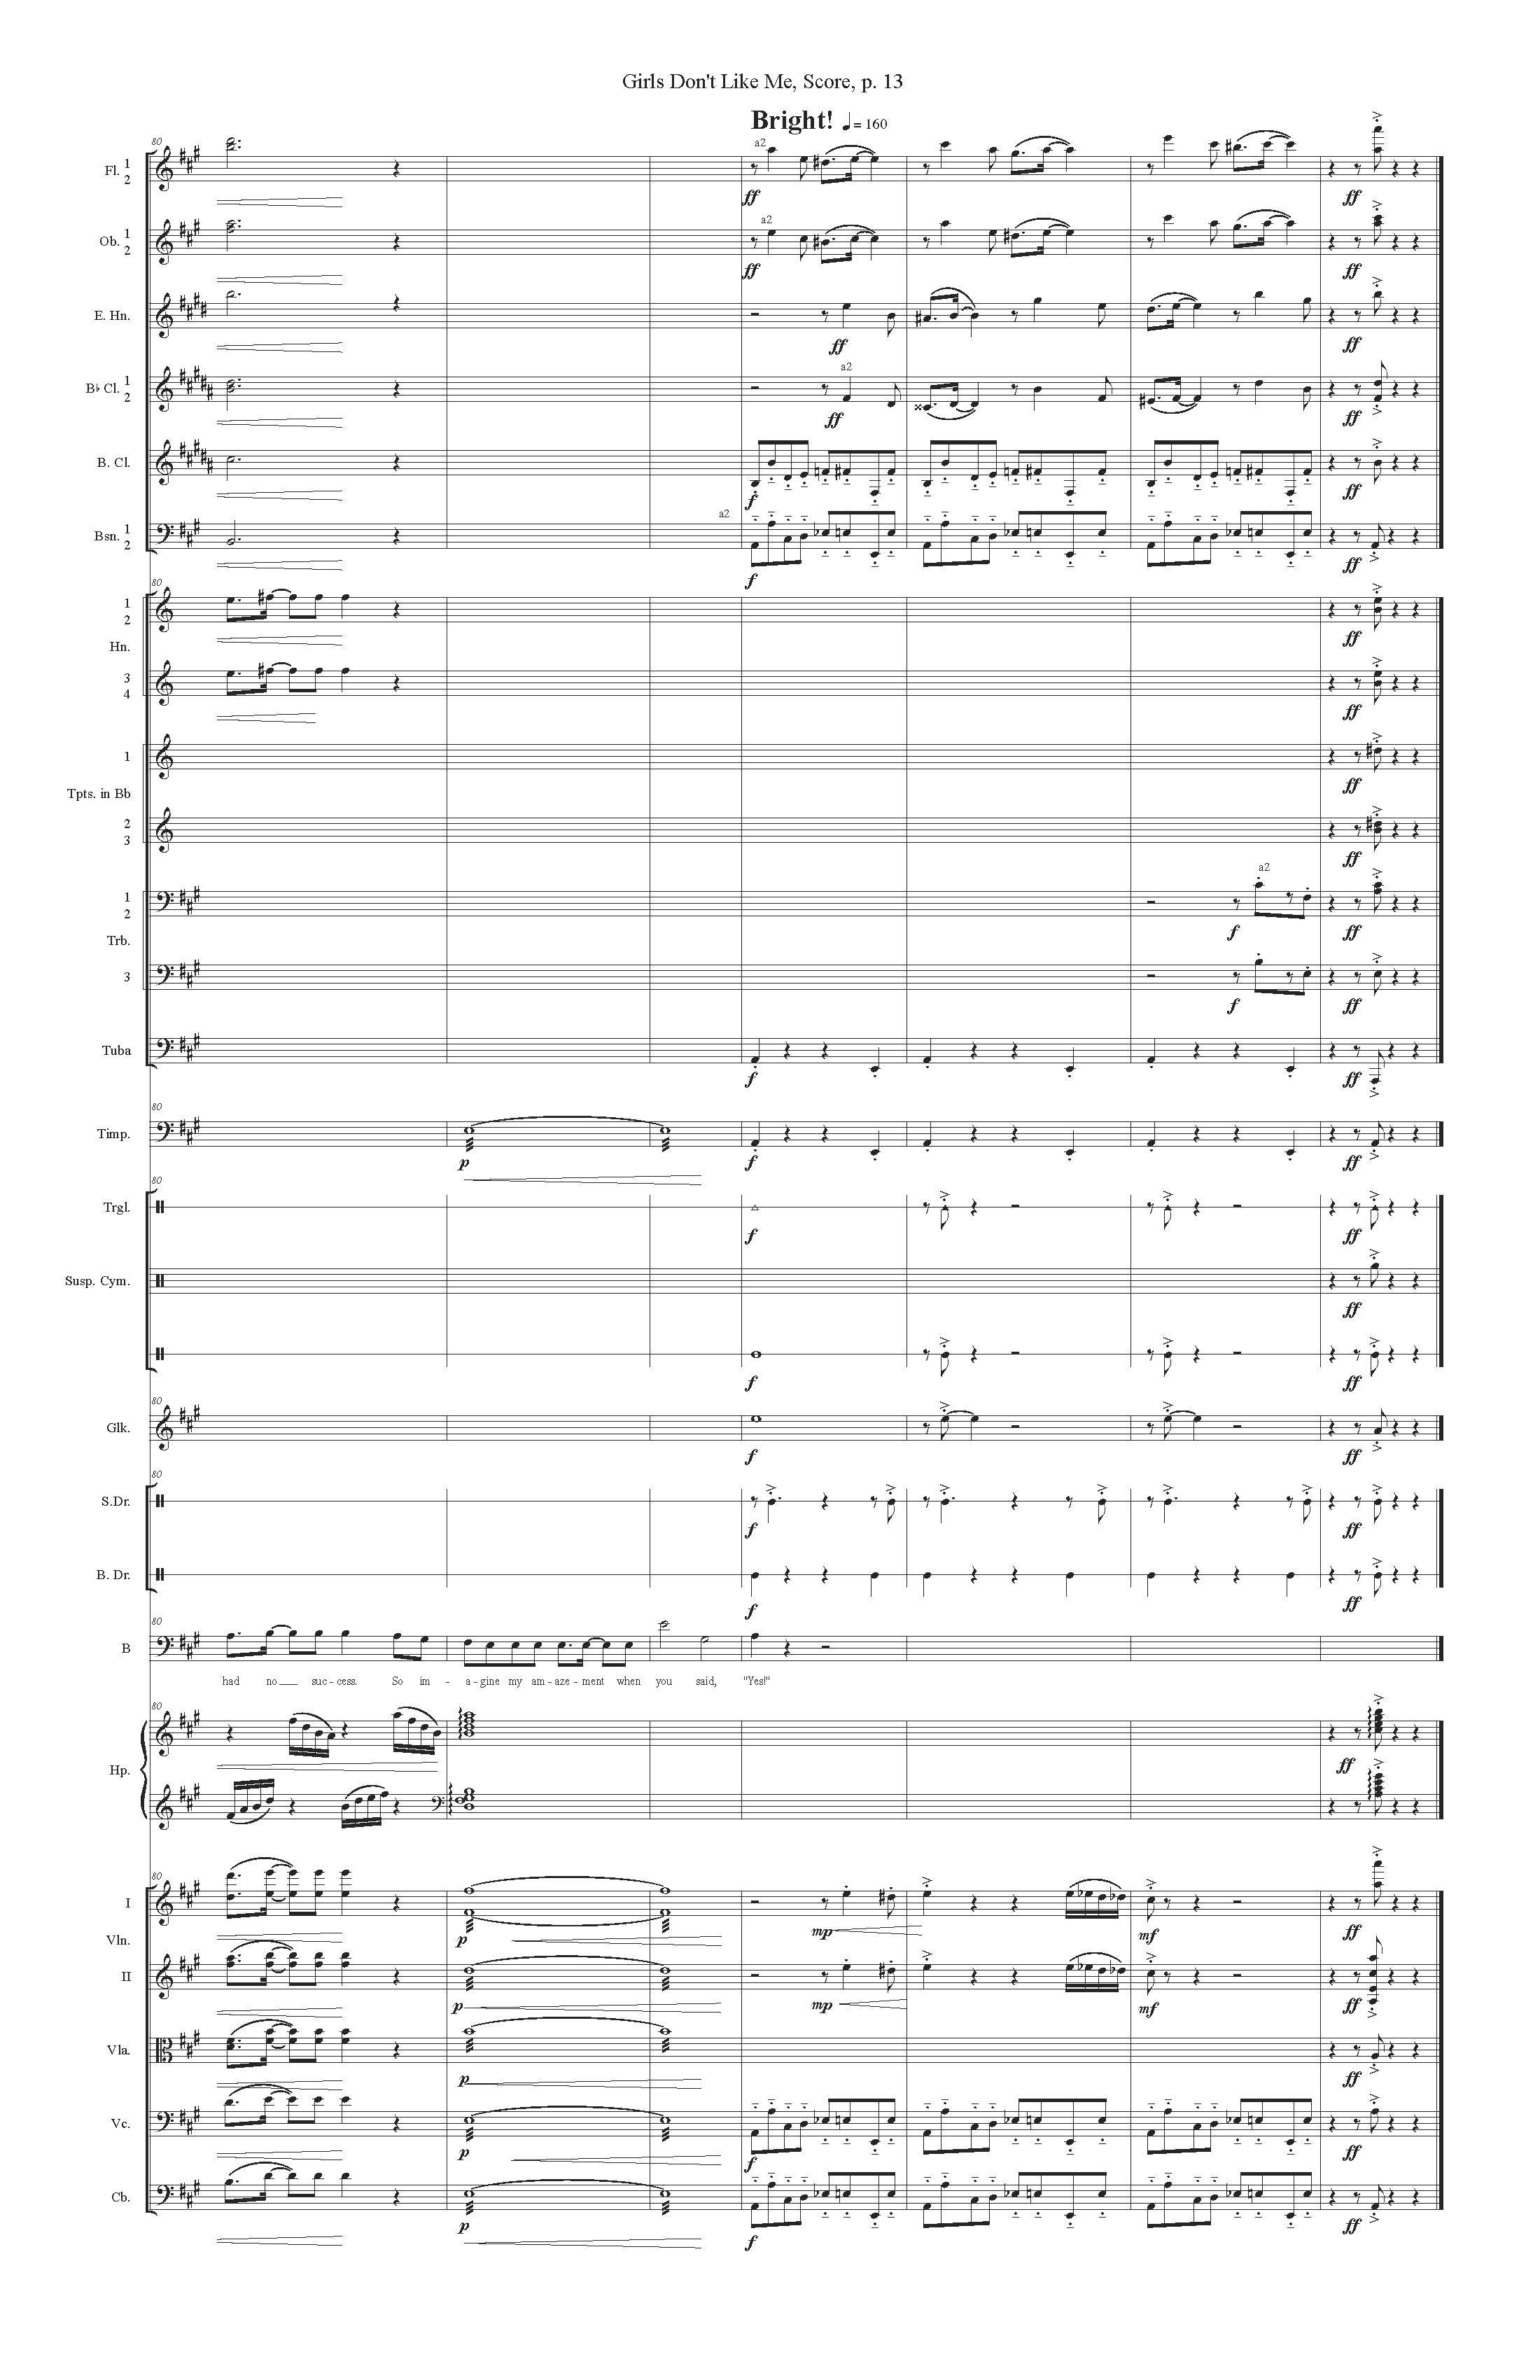 GIRLS DON'T LIKE ME ORCH - Score_Page_13.jpg